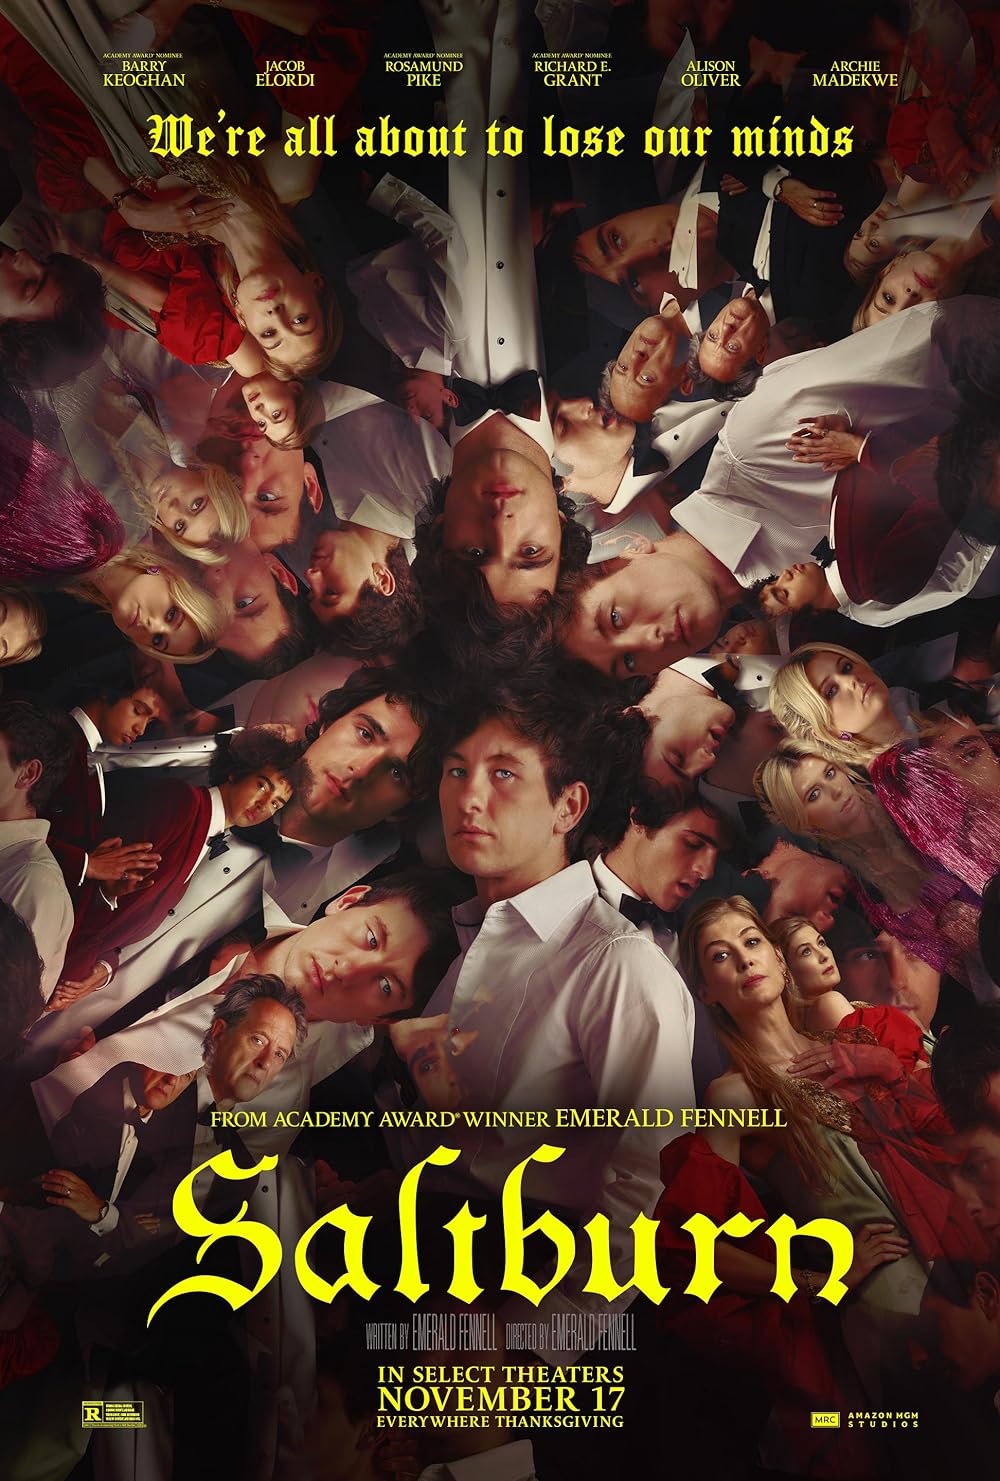 Saltburn (December 22) - Streaming on Prime VideoSaltburn zooms in on Oliver Quick's strategic manipulations and sociopathic traits as he integrates into a prestigious circle, featuring a star-studded cast including Rosamund Pike, Richard E. Grant, and Carey Mulligan.